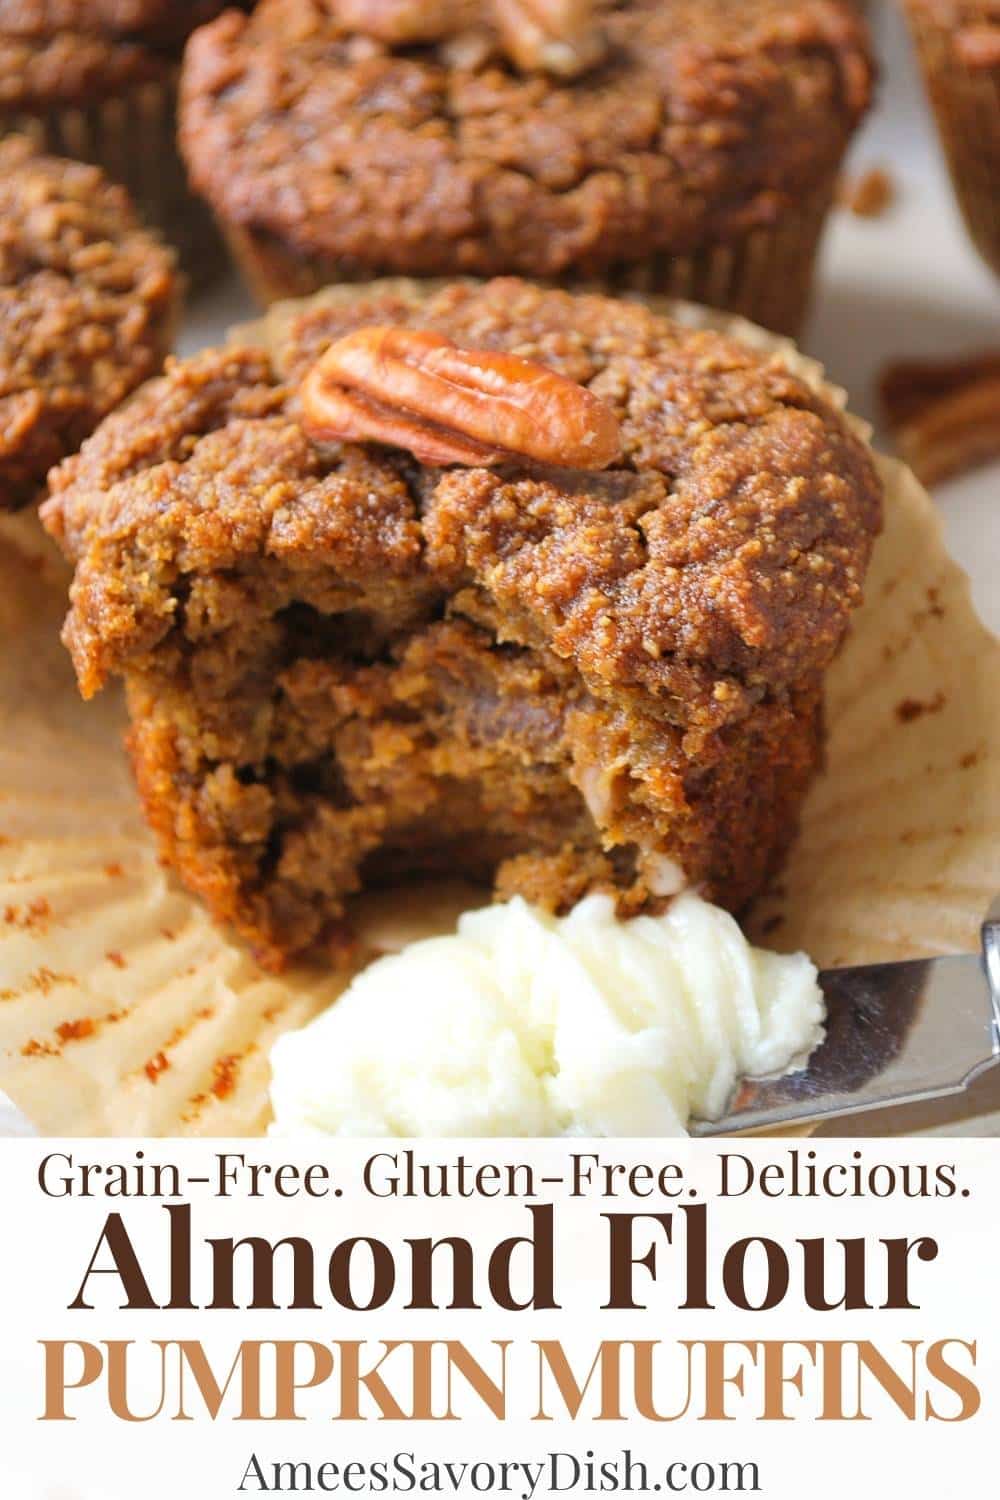 Almond Flour Pumpkin muffins are made with nutritious ingredients like almond flour, coconut sugar, dates, and nuts -healthy and delicious! via @Ameessavorydish